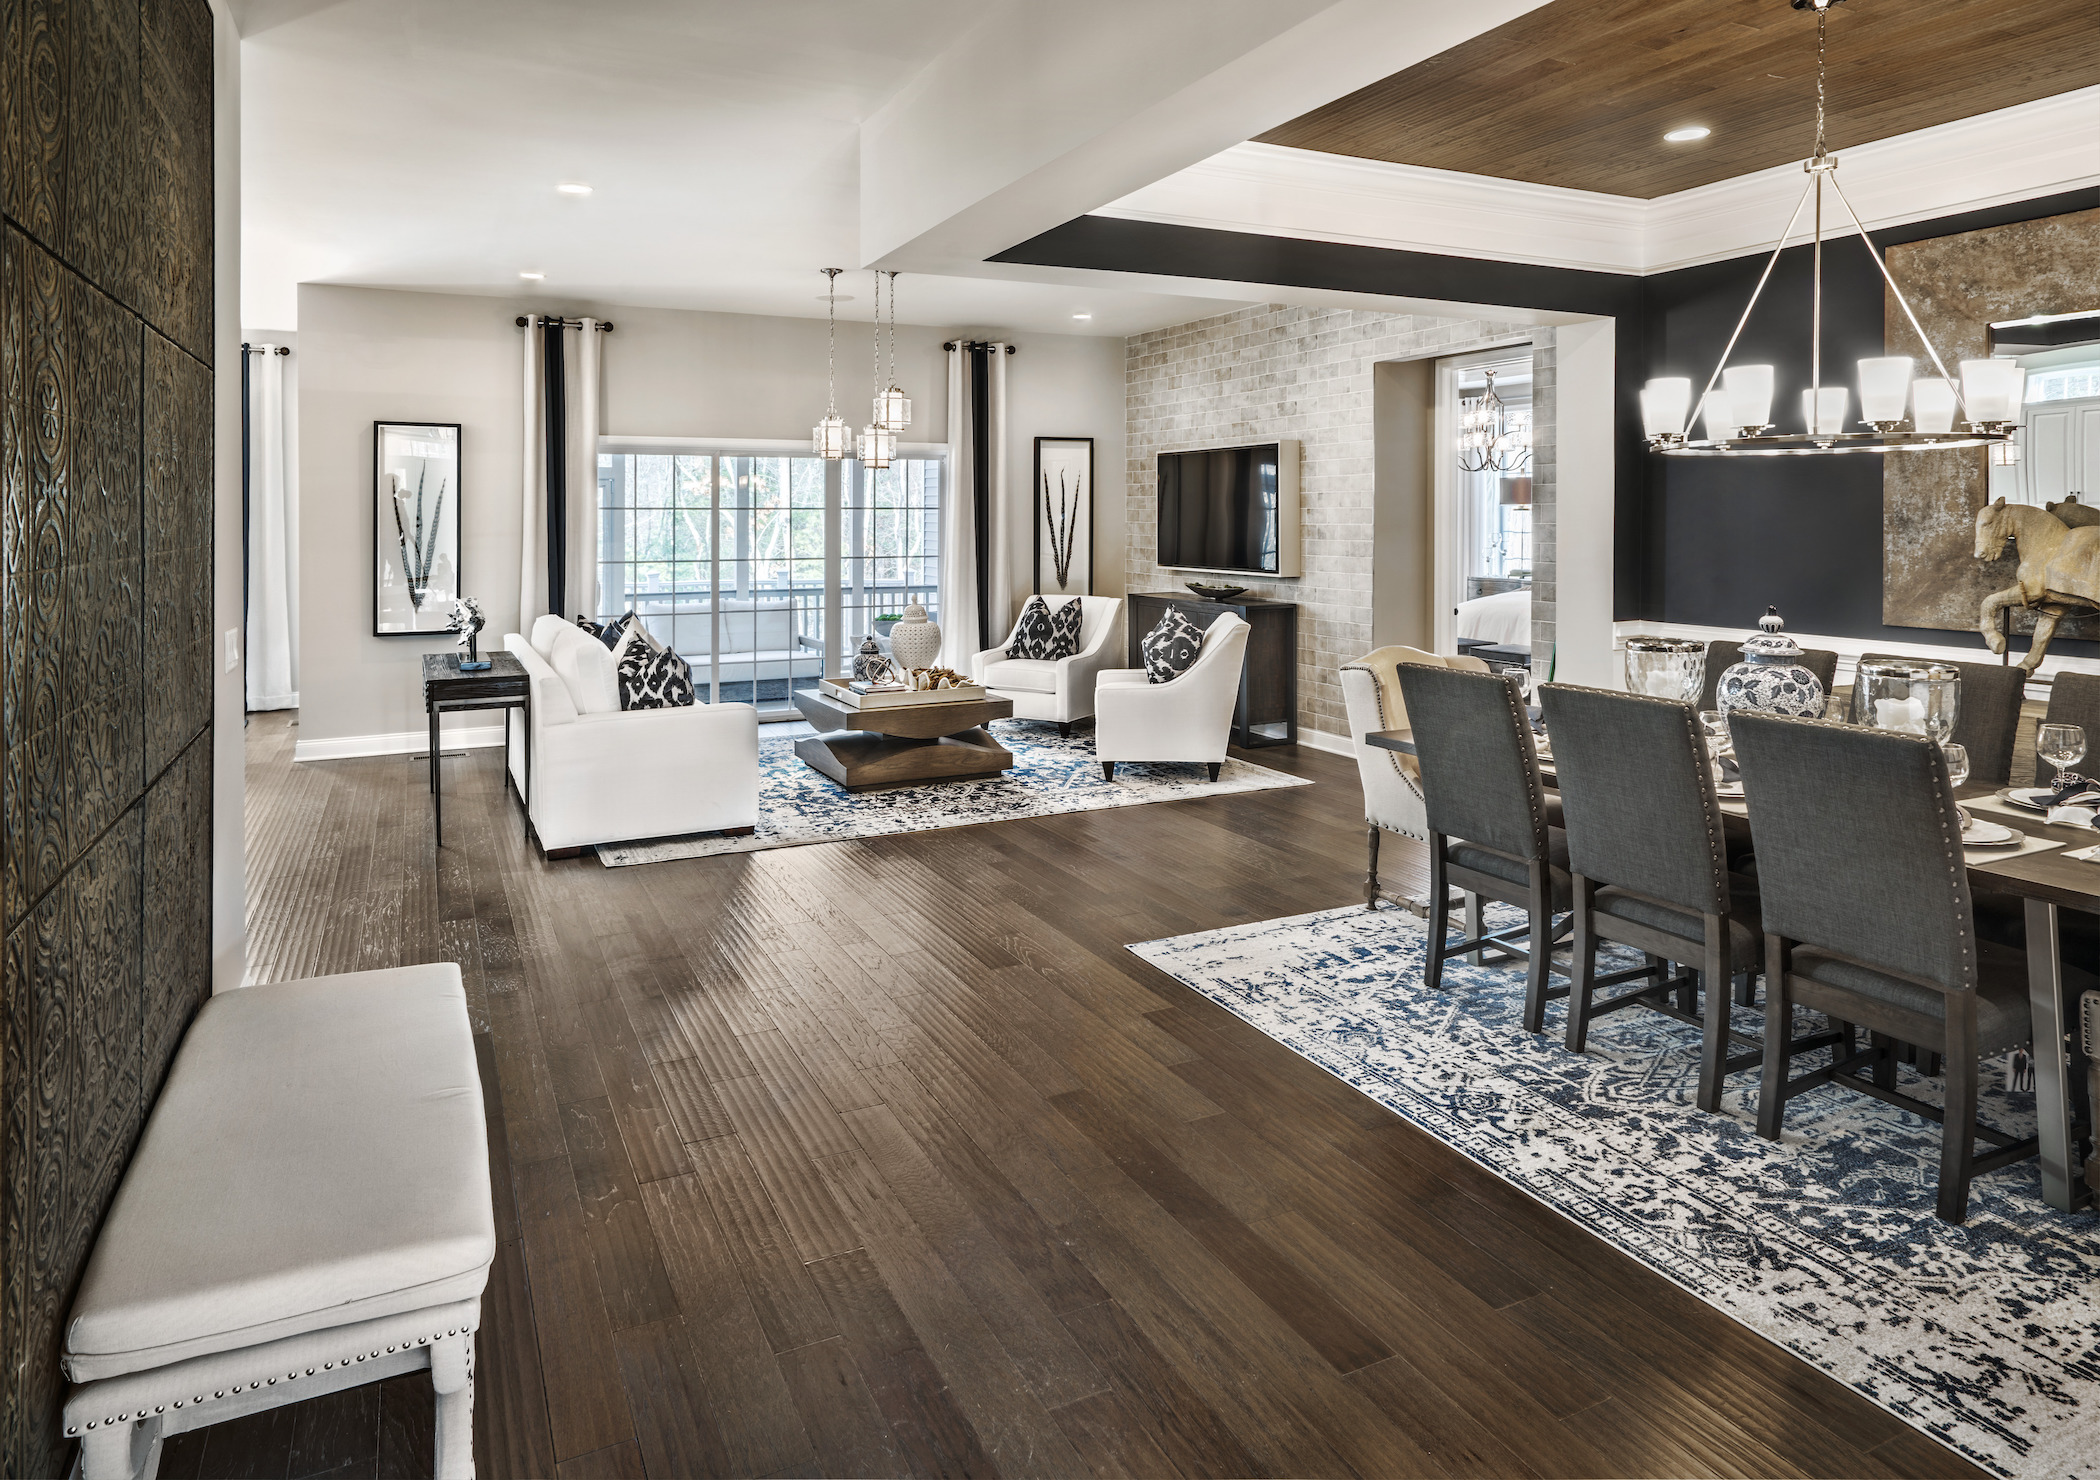 Open-concept space with beautiful hardwood flooring.